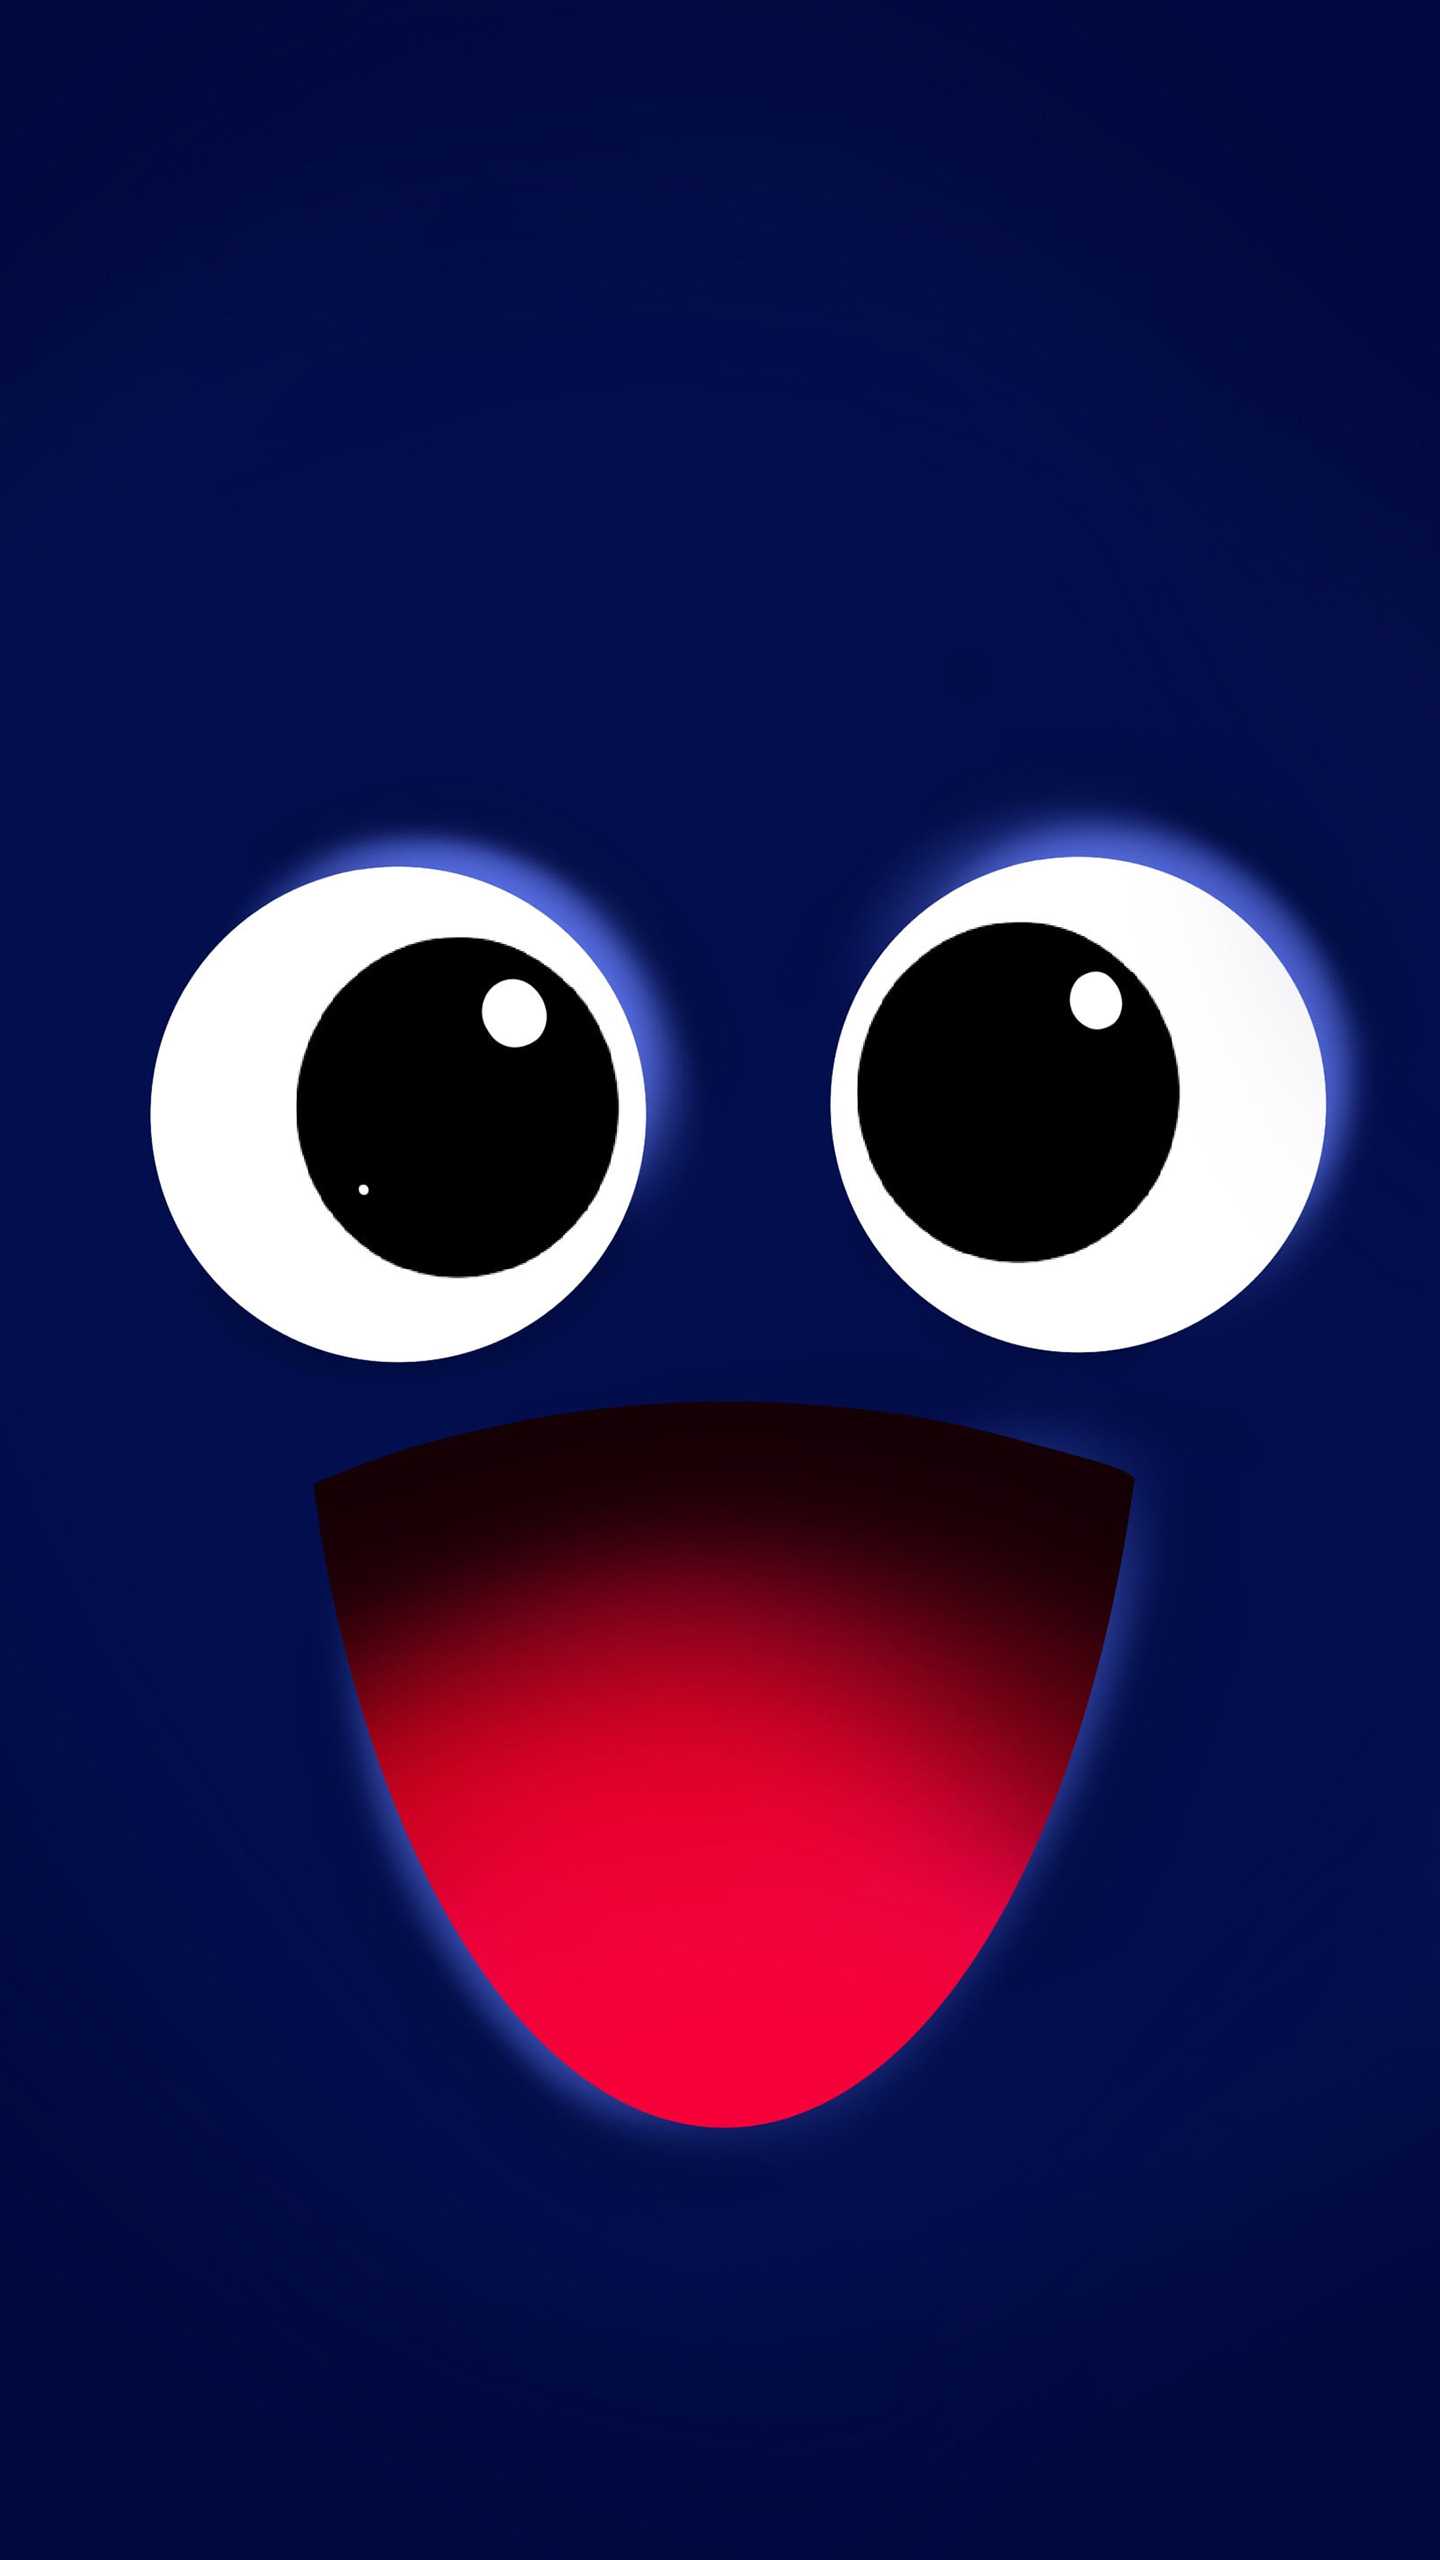 Blue Smiley Face Wallpaper - KoLPaPer - Awesome Free HD Wallpapers